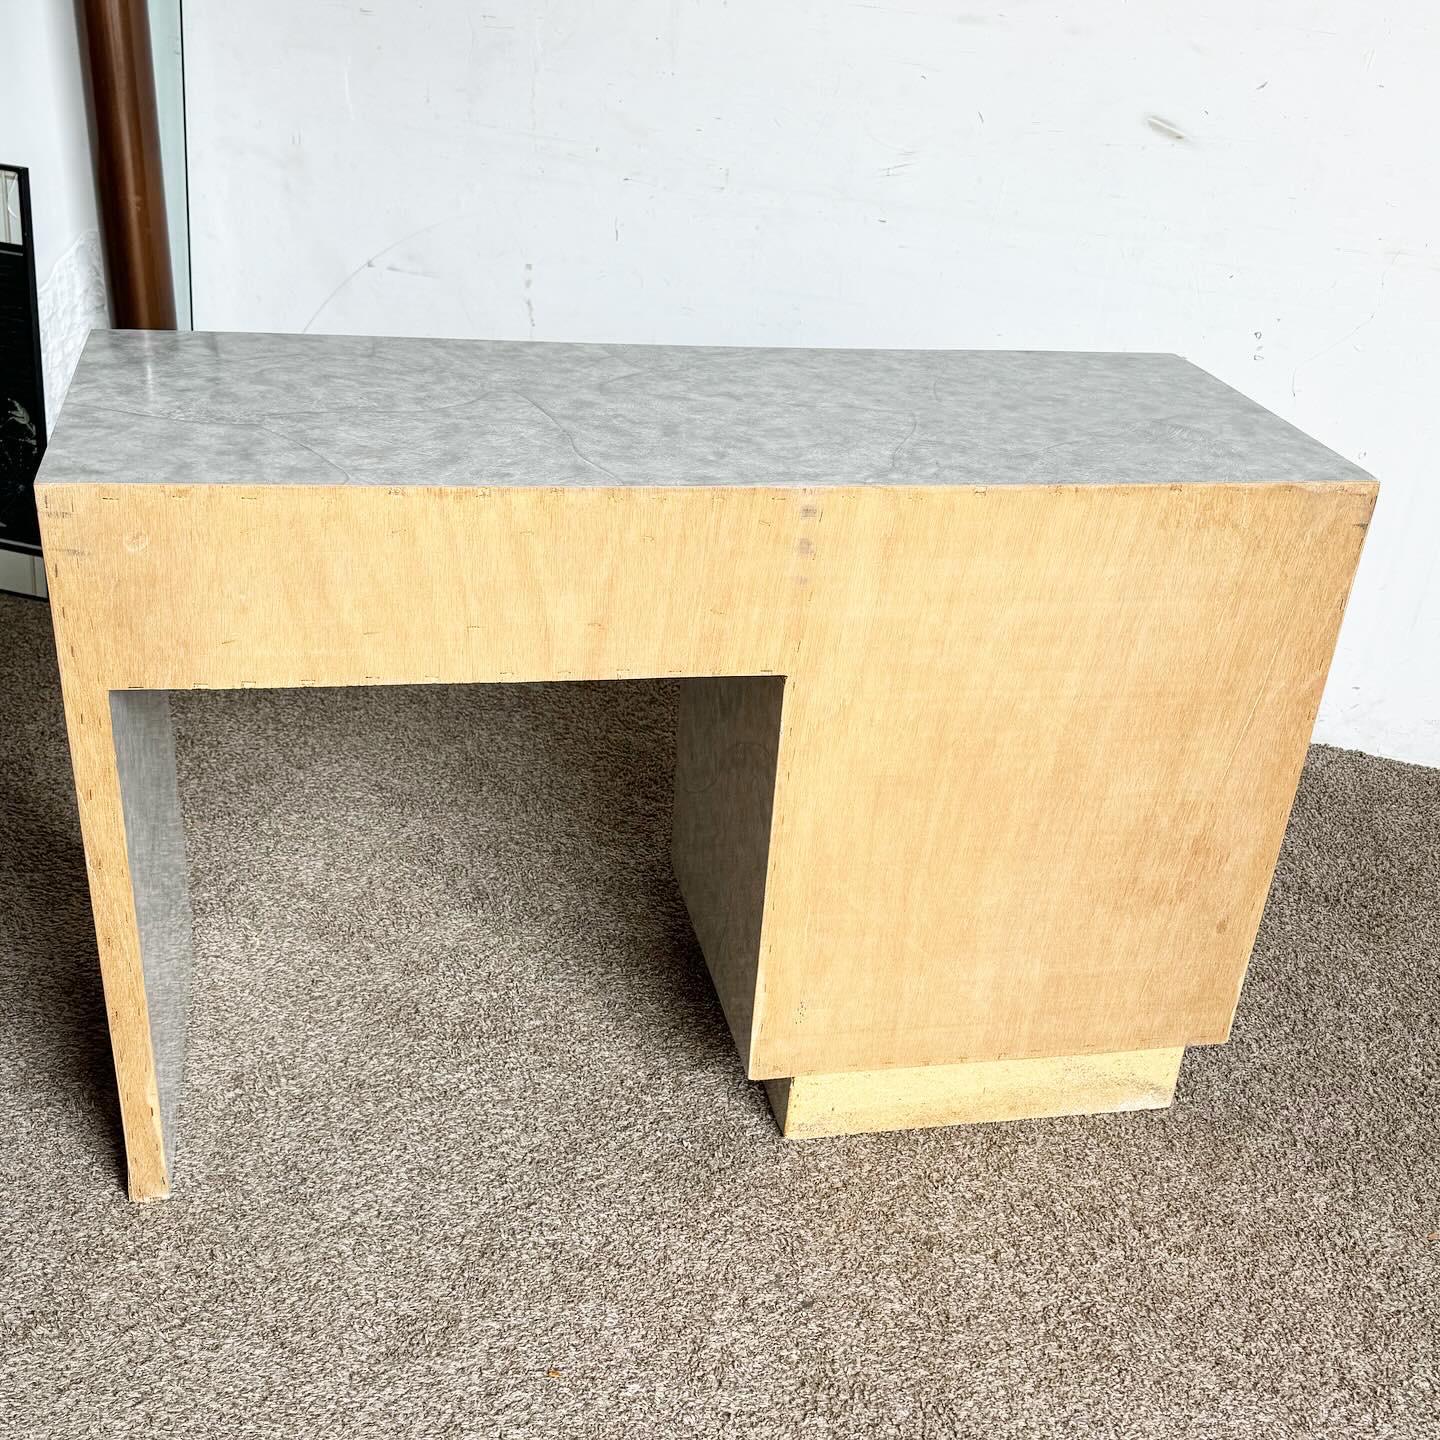 20th Century Postmodern Gray Faux Stone Laminate Writing Desk - 4 Drawers For Sale